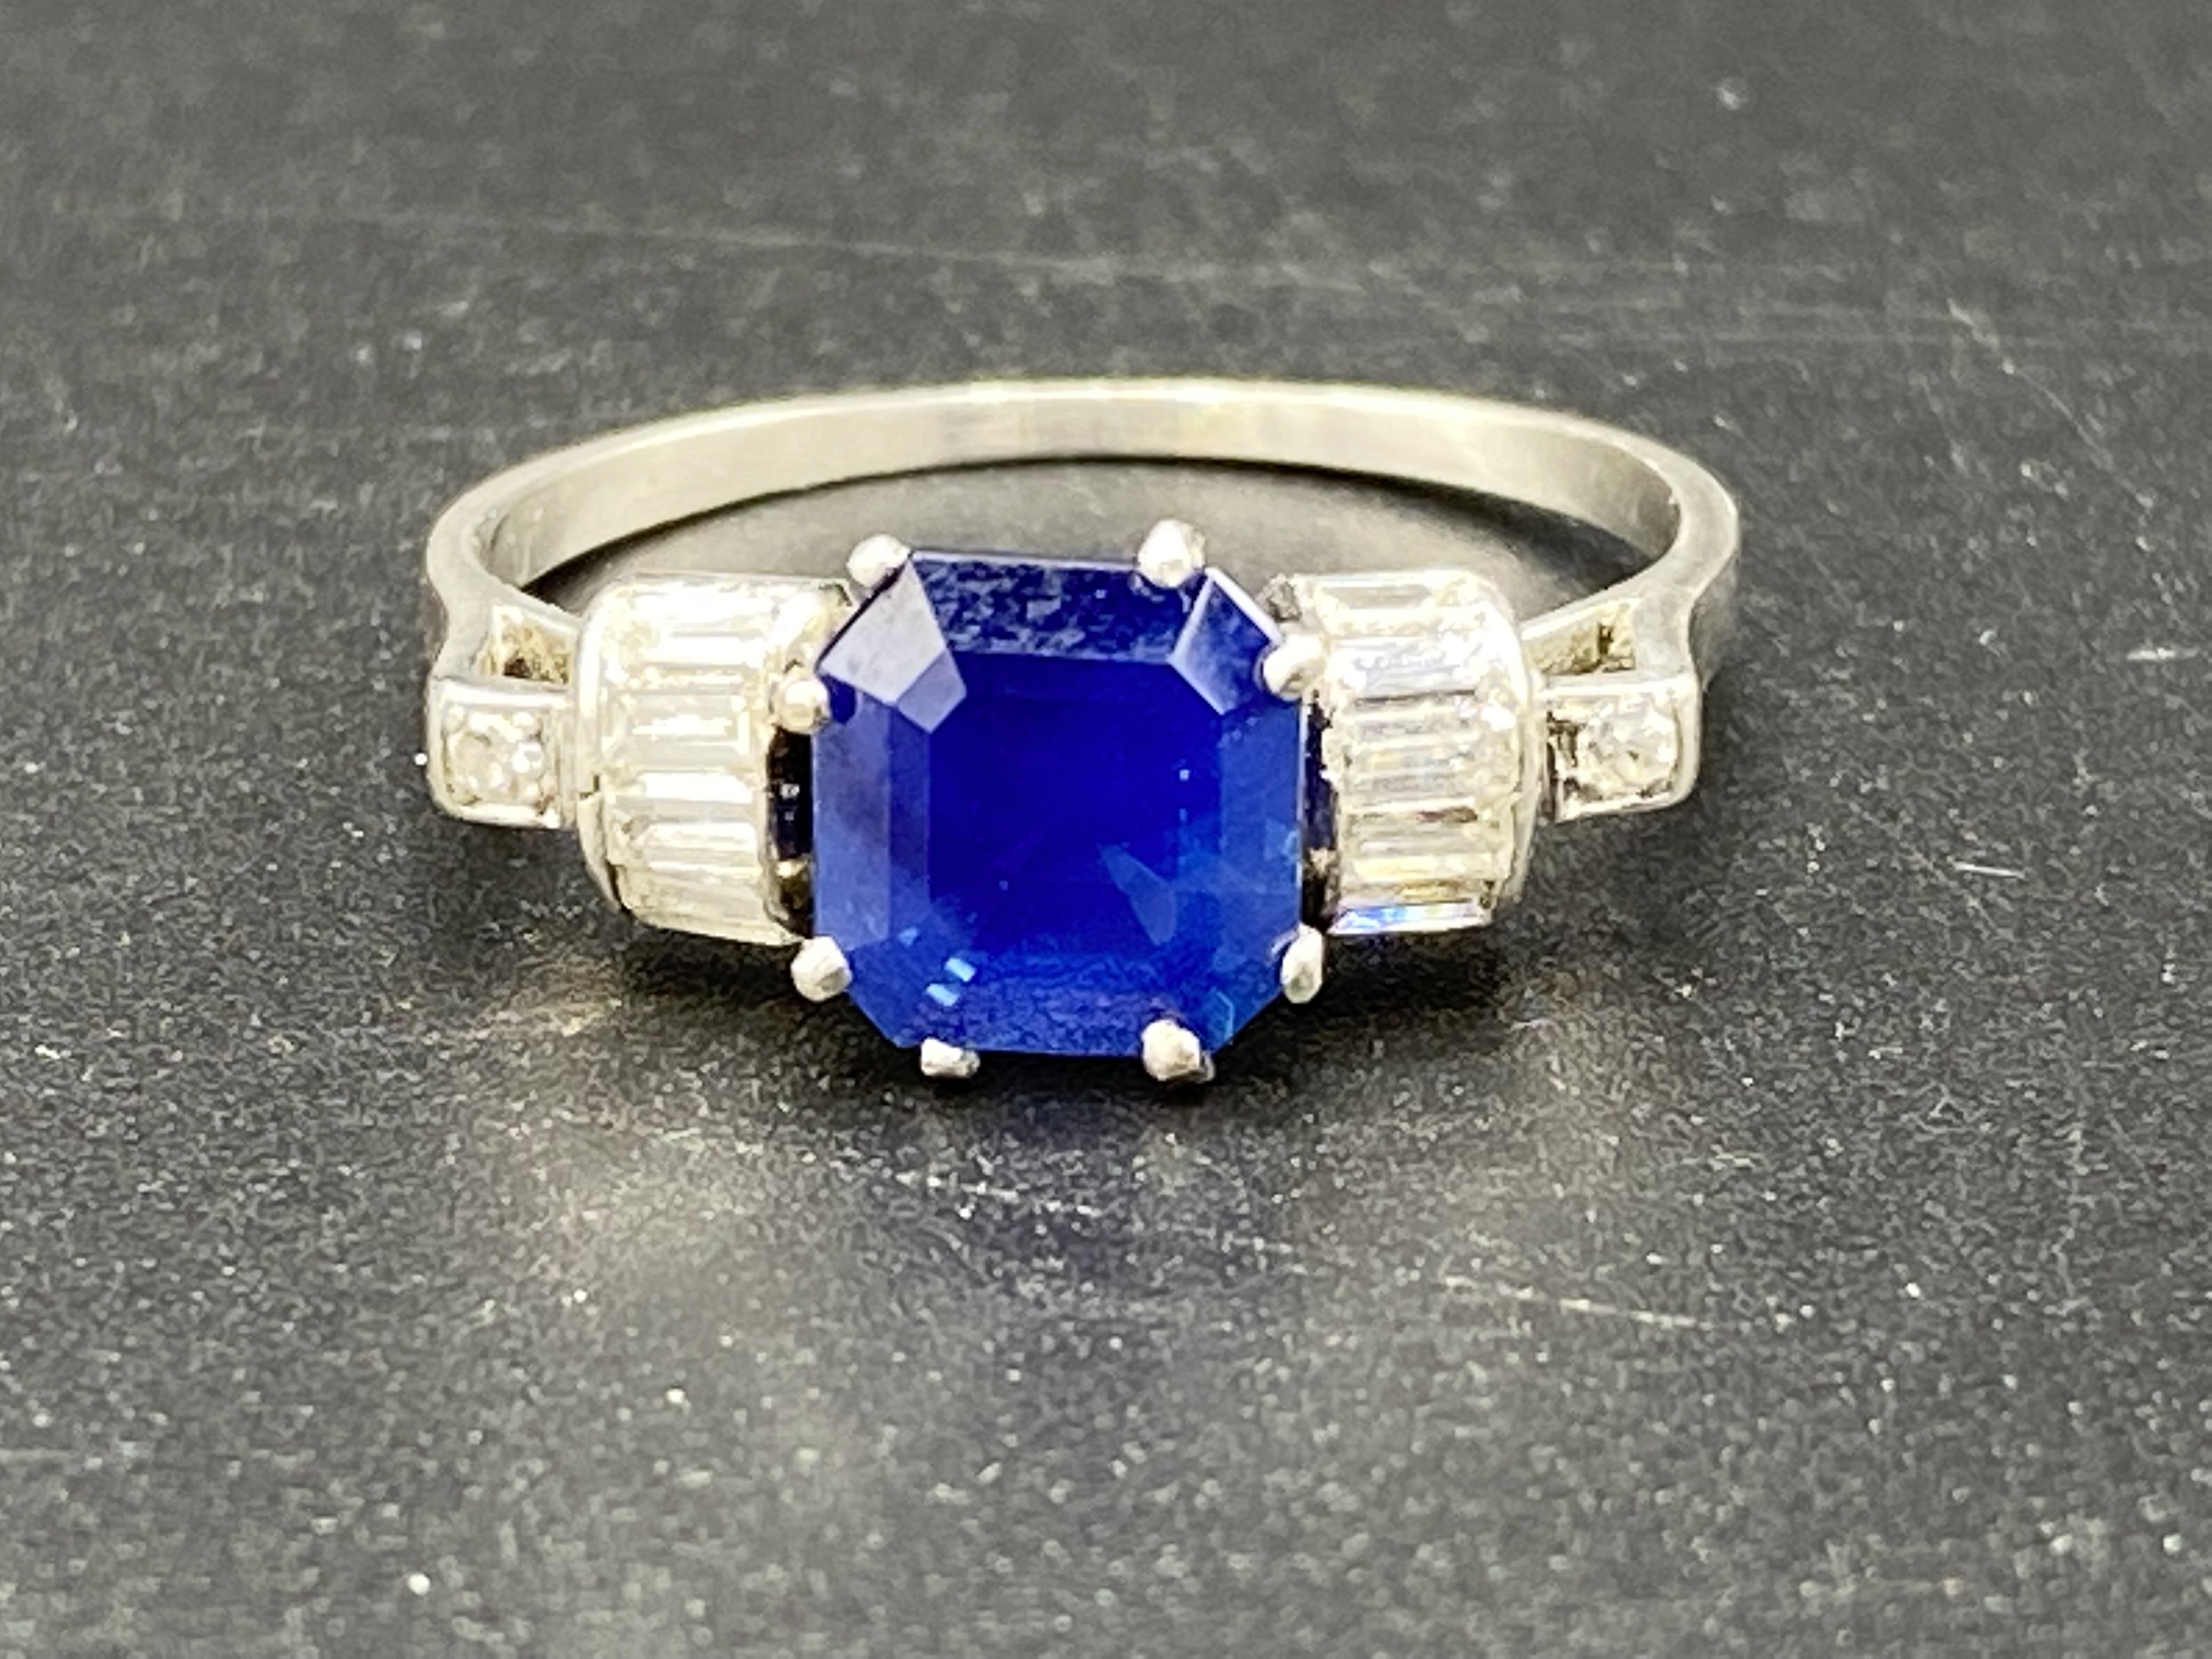 White gold, sapphire and diamond art deco style ring